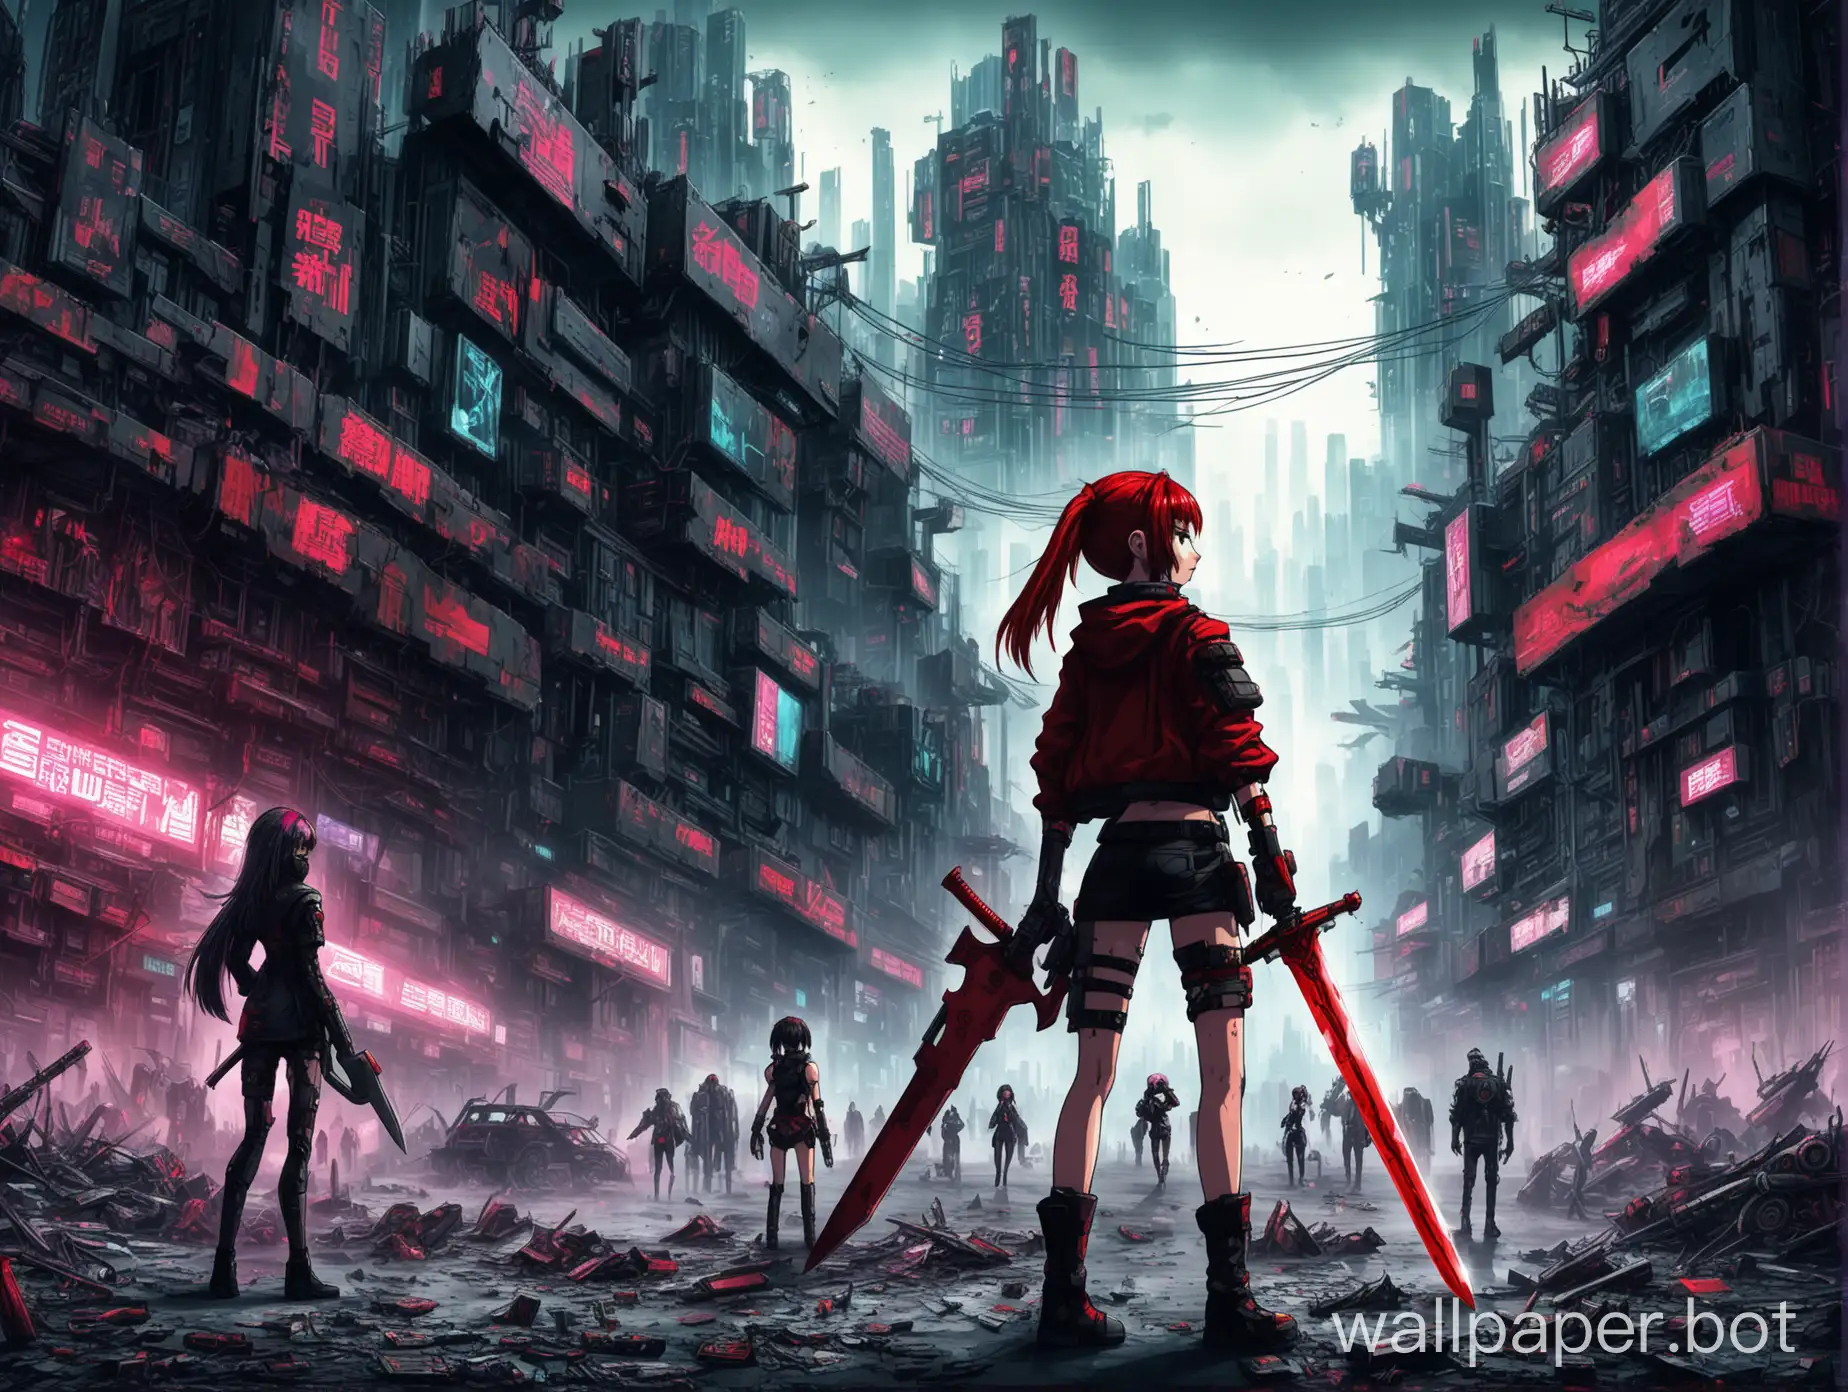 Anime-Cyberpunk-Apocalypse-World-with-a-Distant-Girl-and-Red-Sword